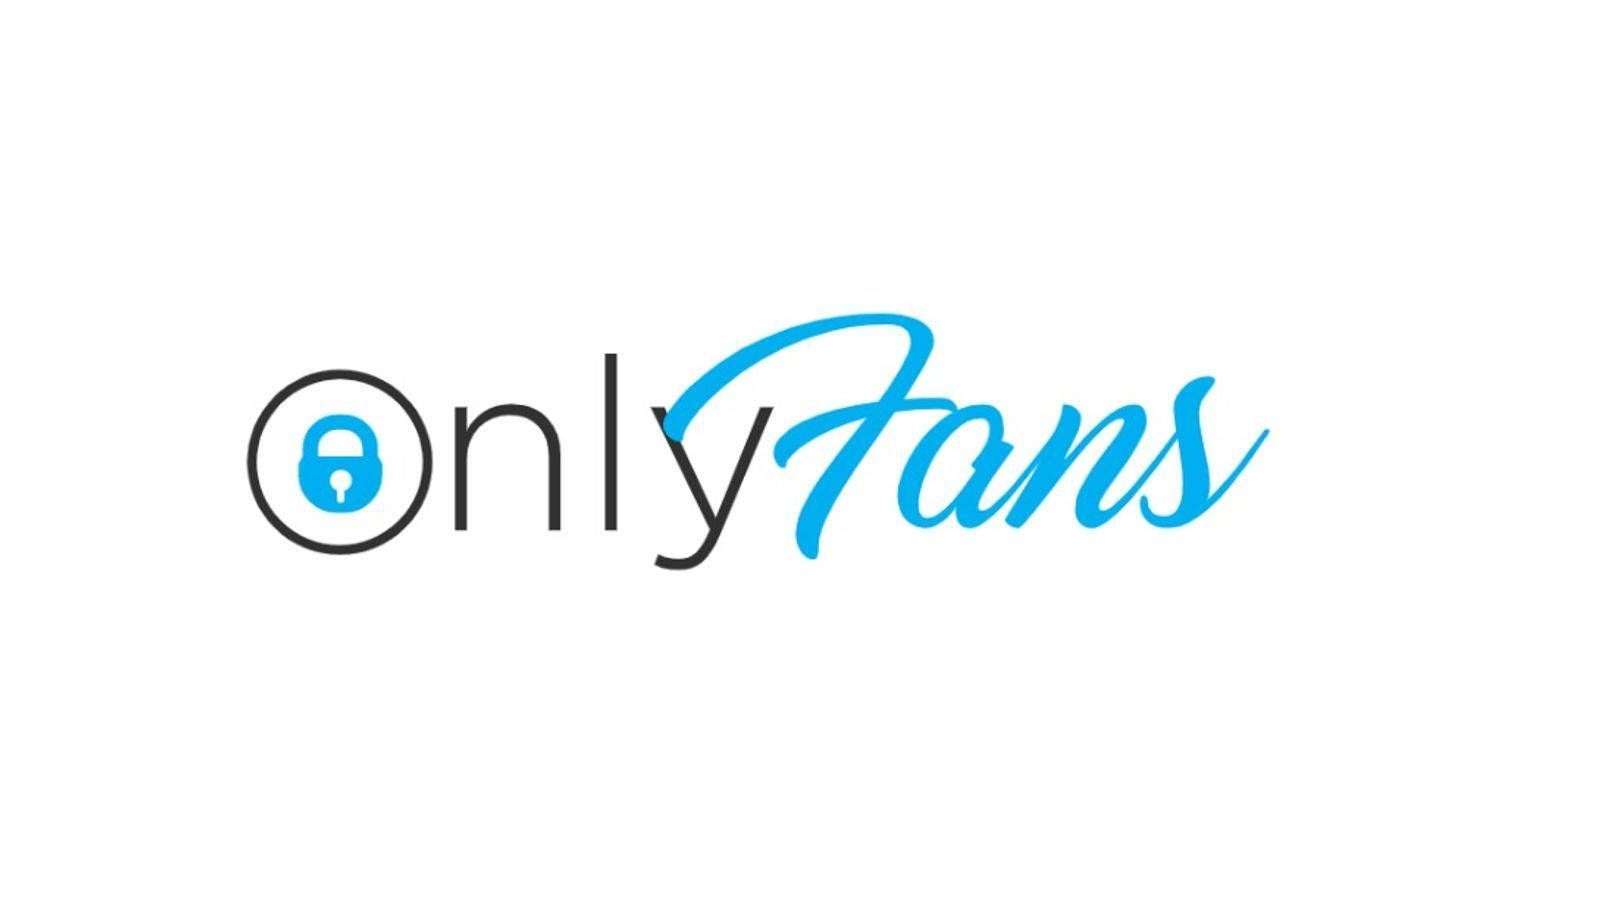 Only fans discord server